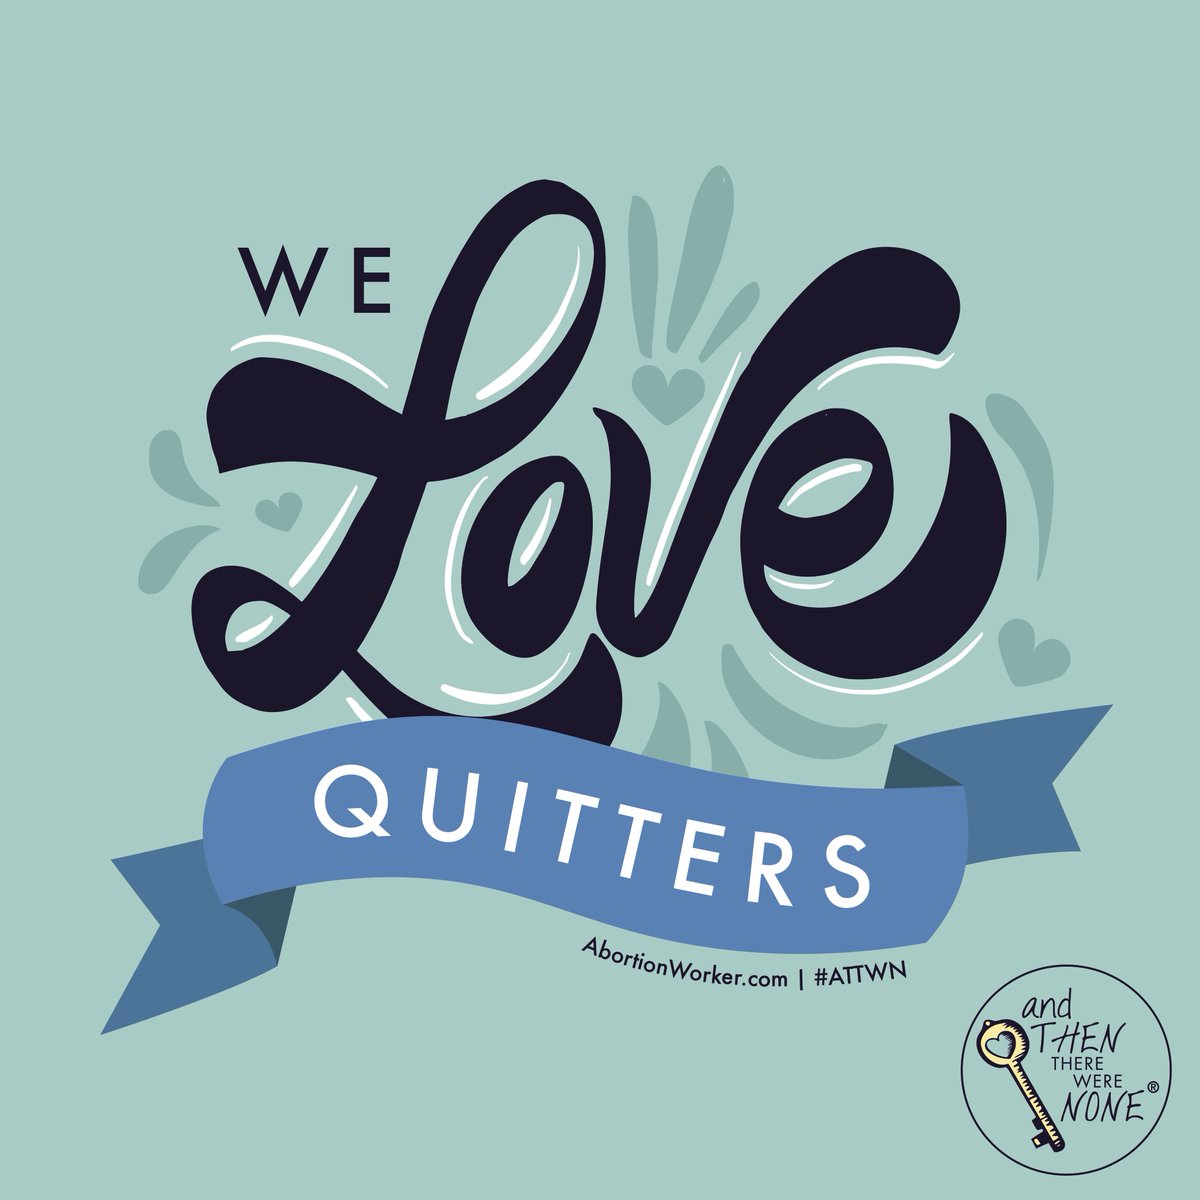 Yes we do! We love Quitters, how about you?

Quitters is an affectionate term we give to those who have chosen to quit working in the abortion industry and find the joy and freedom that they've been missing.

#abortionworkers #quitters #attwn